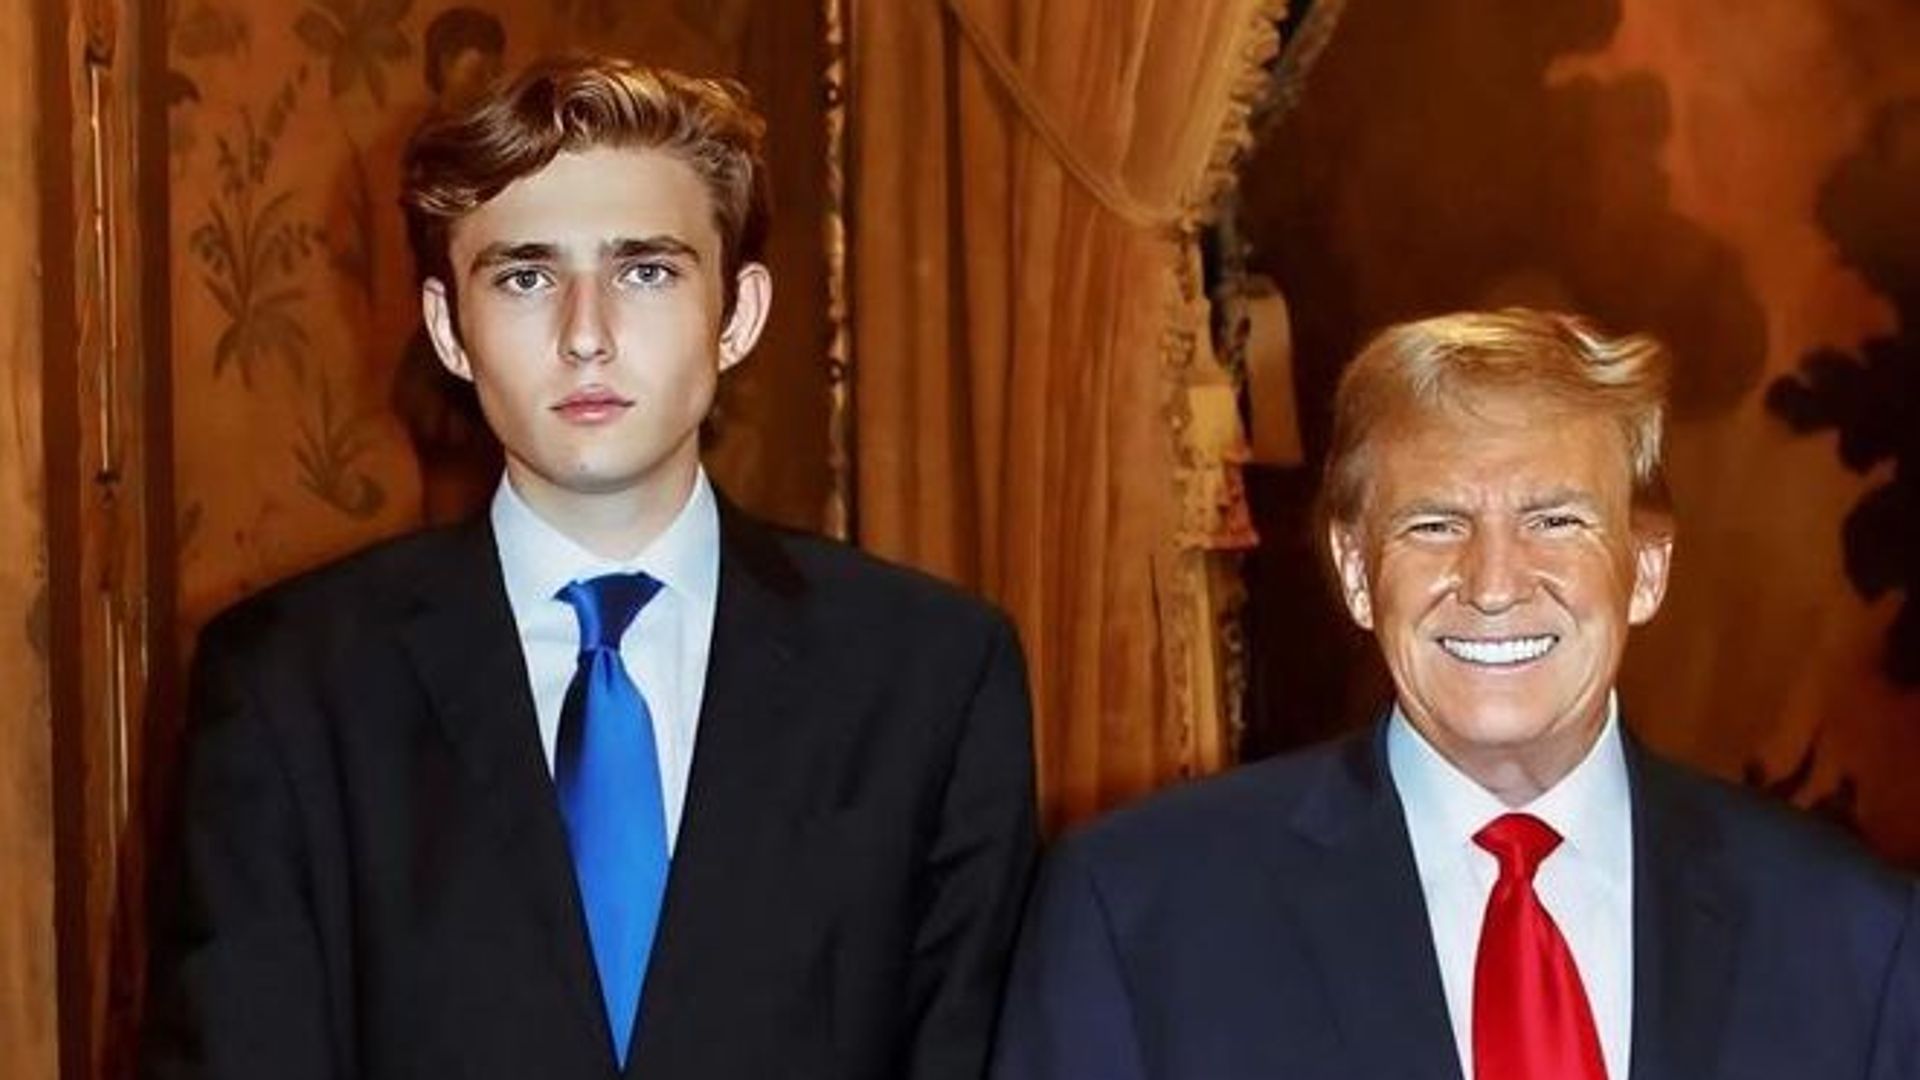 Barron Trump's real personality revealed as personal details of 18-year-old come to light